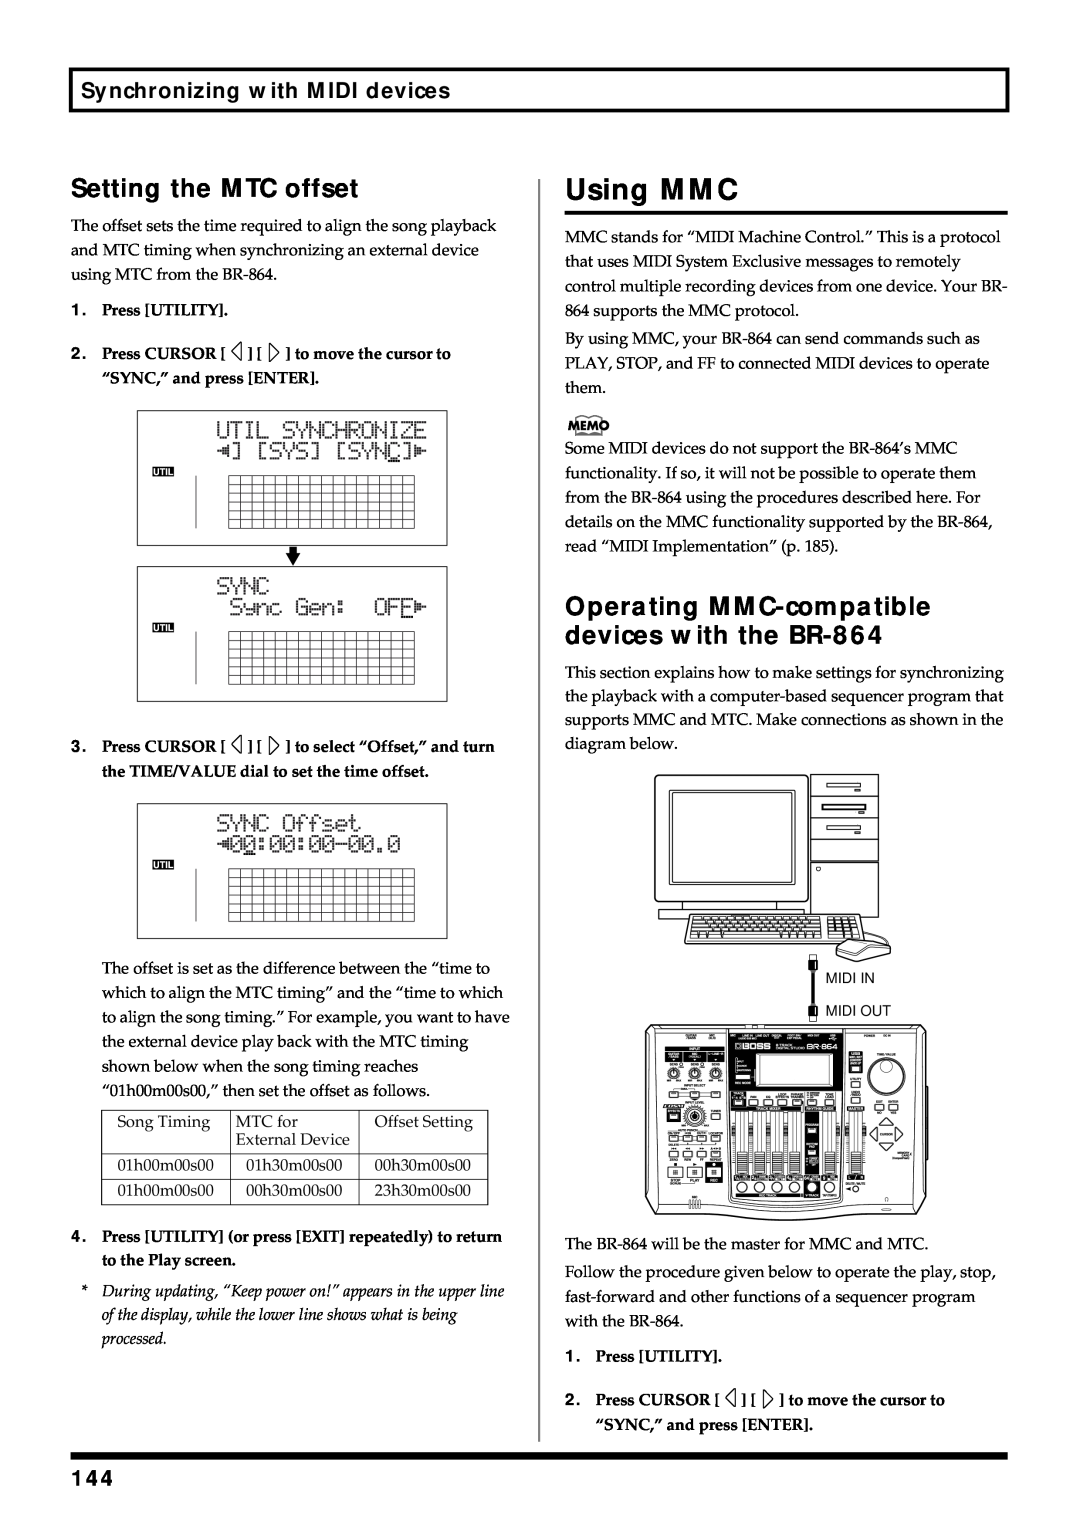 Roland owner manual Using MMC, Setting the MTC offset, Operating MMC-compatibledevices with the BR-864 